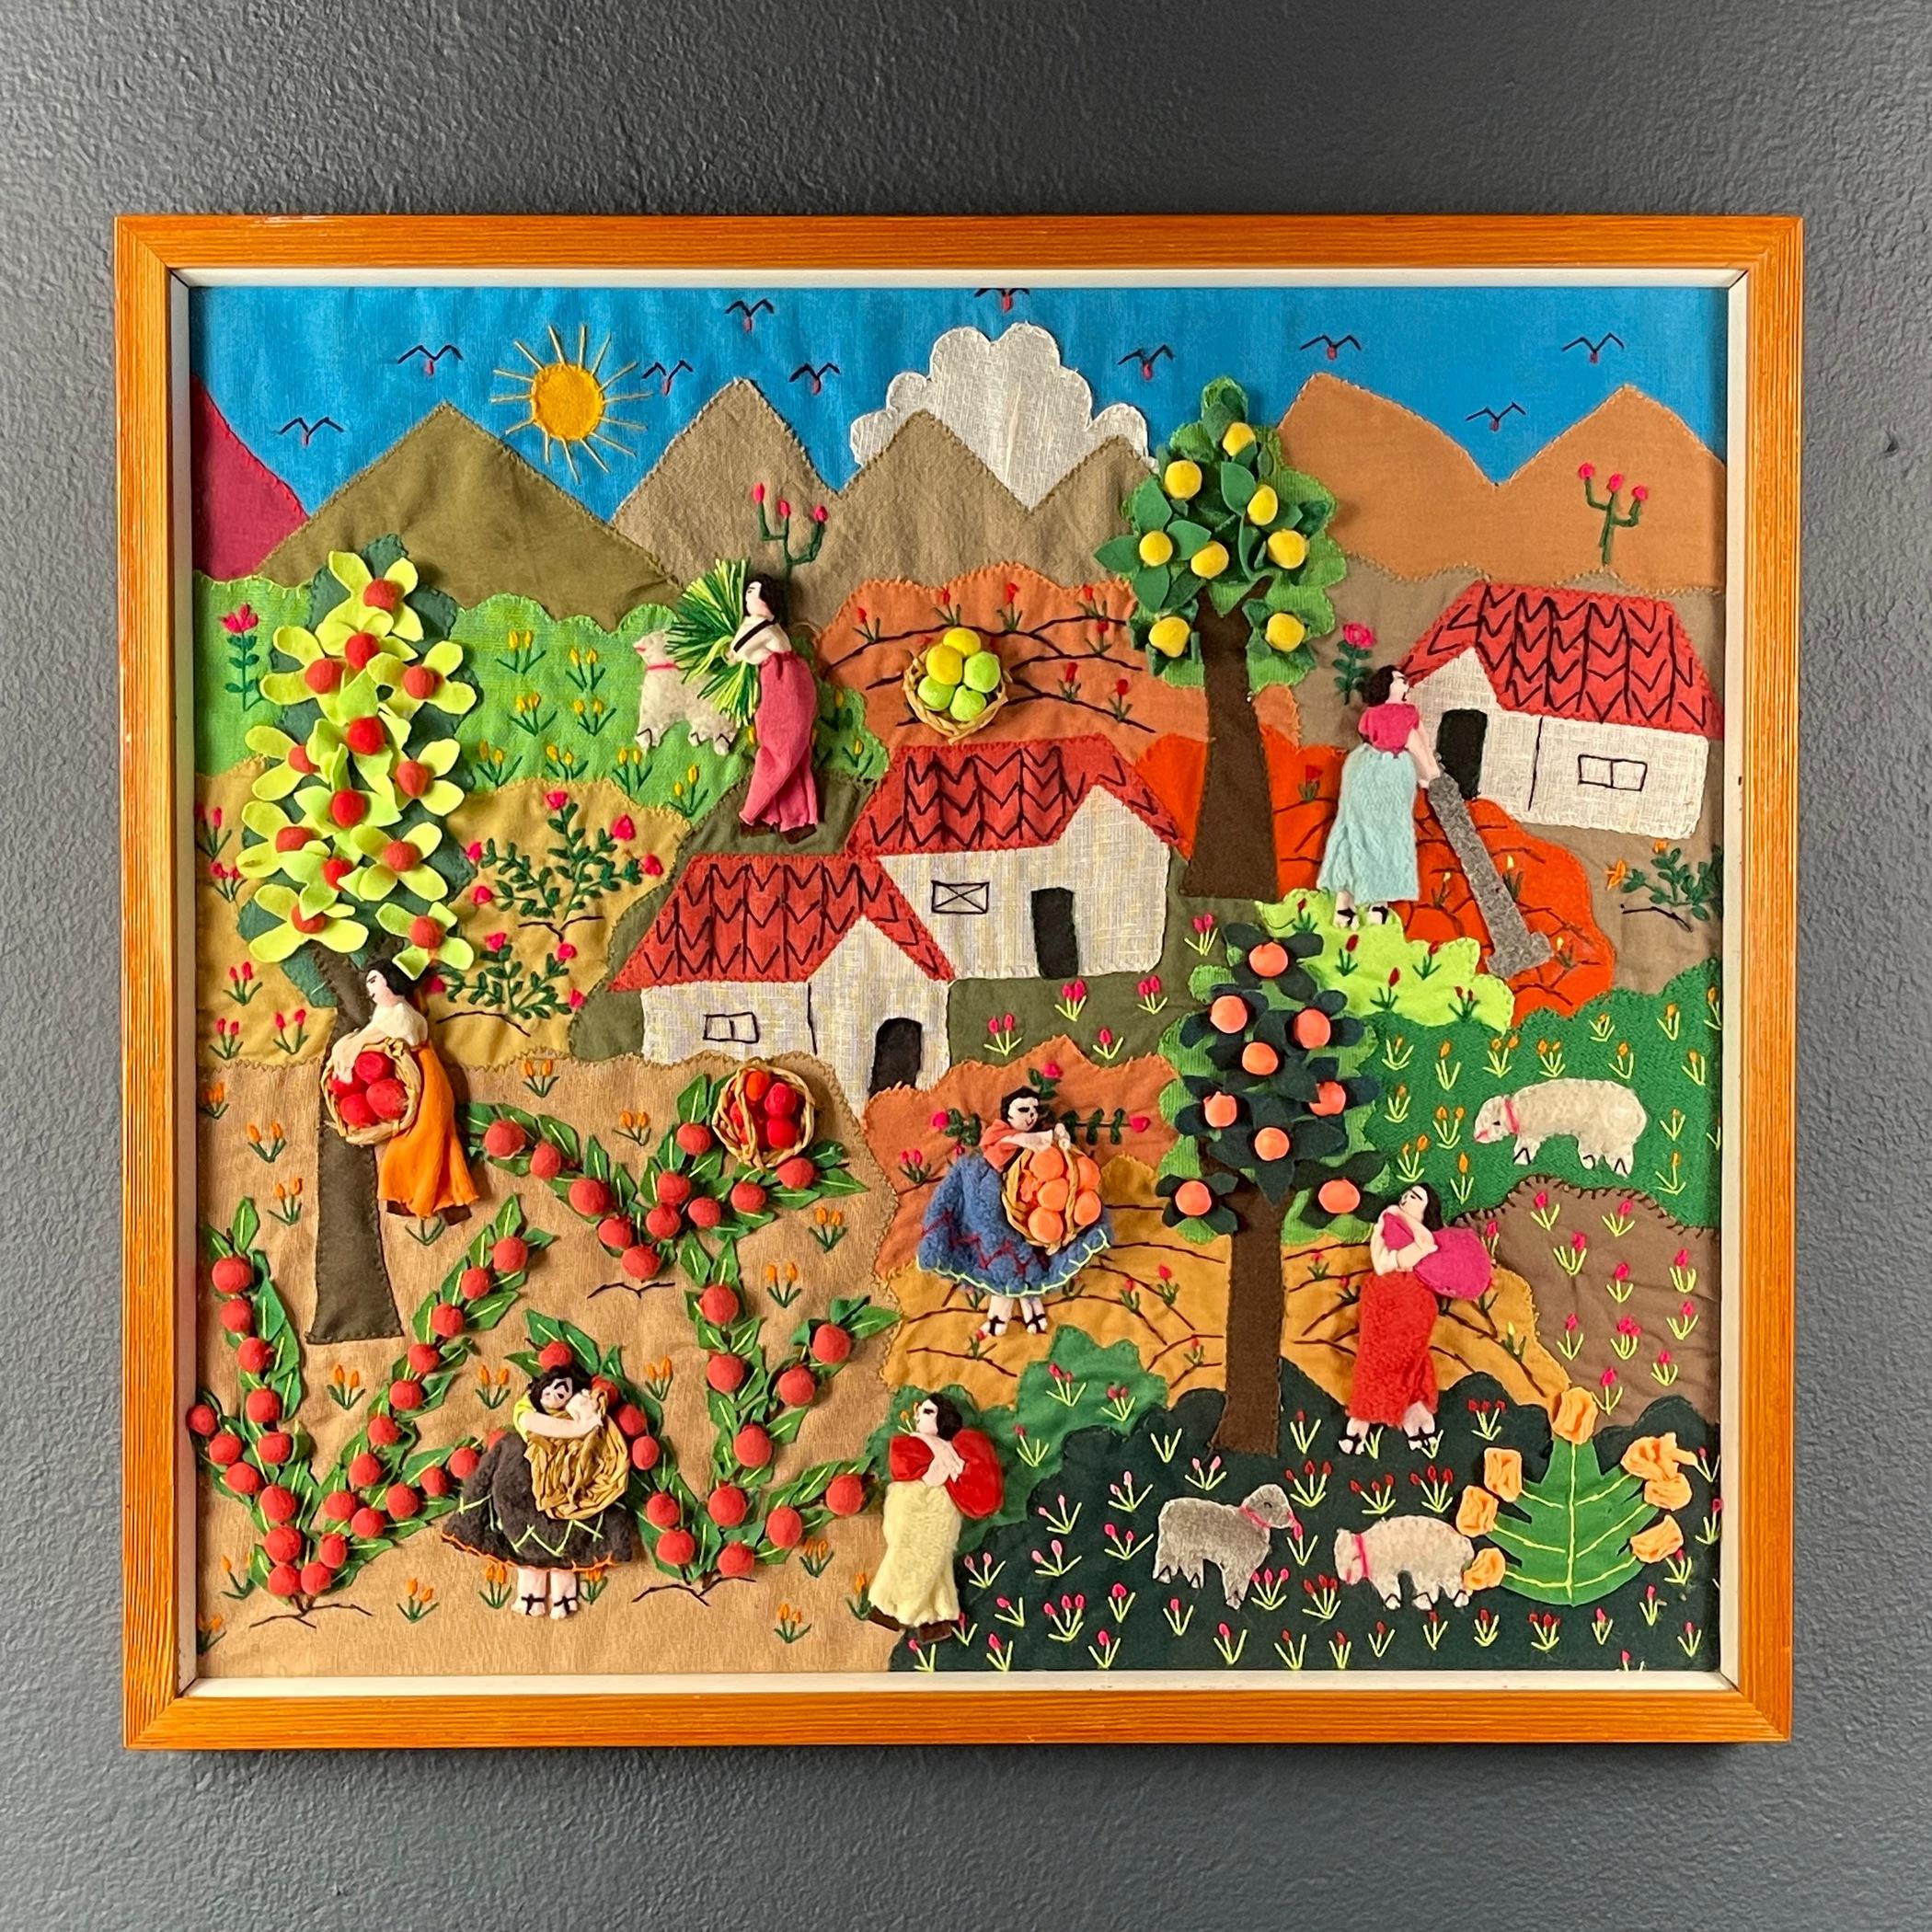 Transport yourself to a simpler time with this charming patchwork painting, titled 'Apple Picking,' a beautiful art made in Italy during the 1980s in Naive art style. This delightful work of folk art captures the full essence of rural life. The